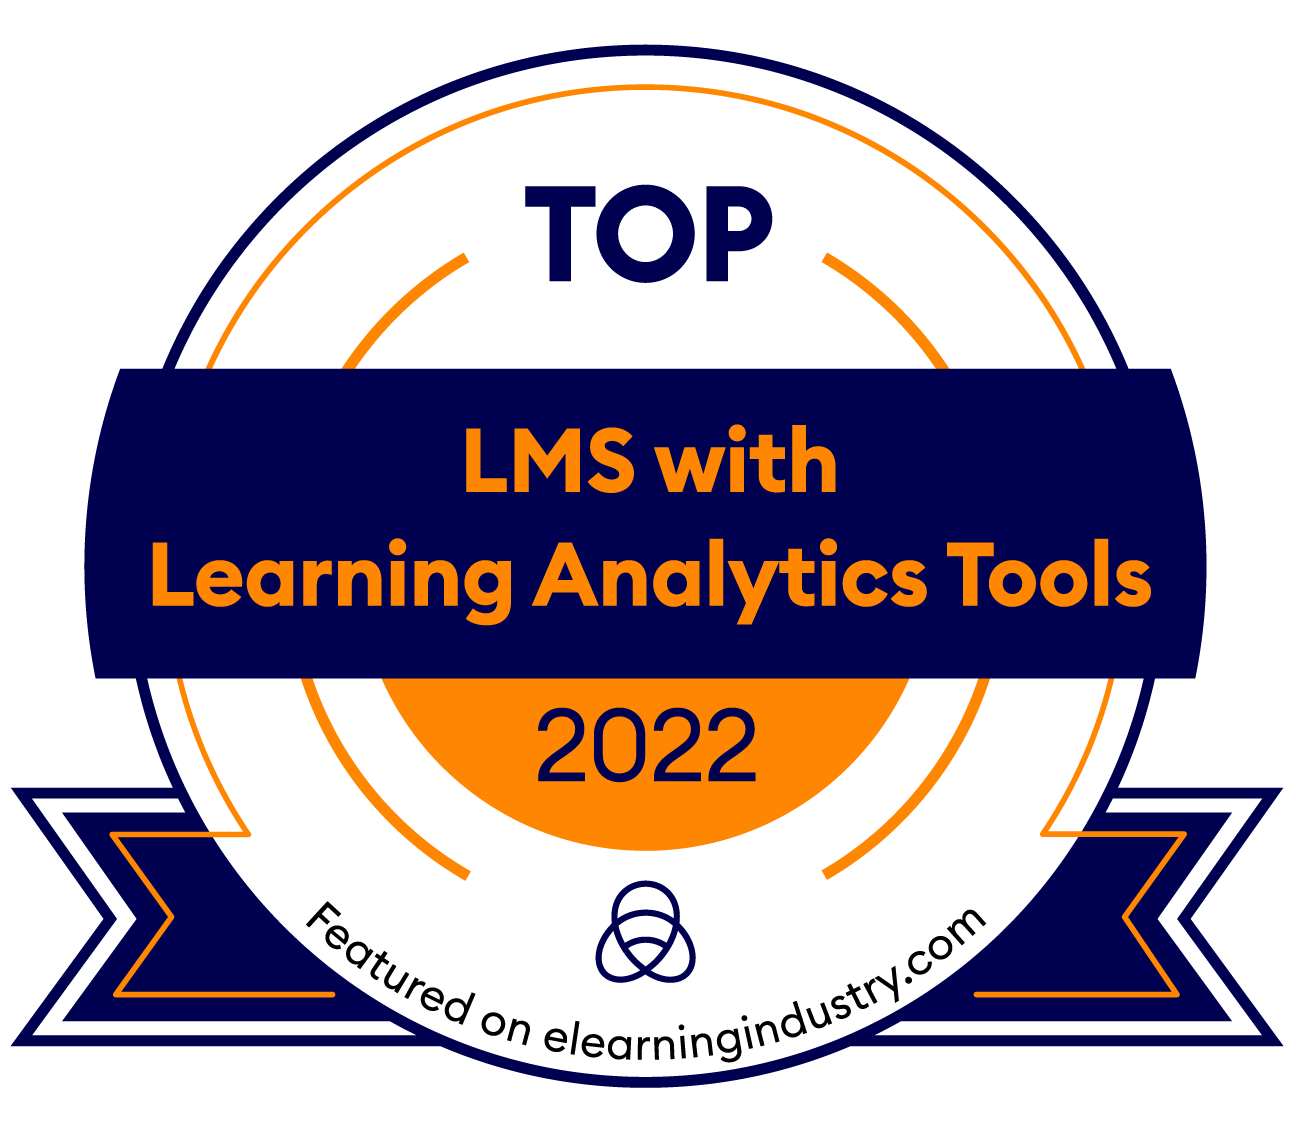 Brainier Named Top LMS with Learning Analytics Tools by eLearning Industry